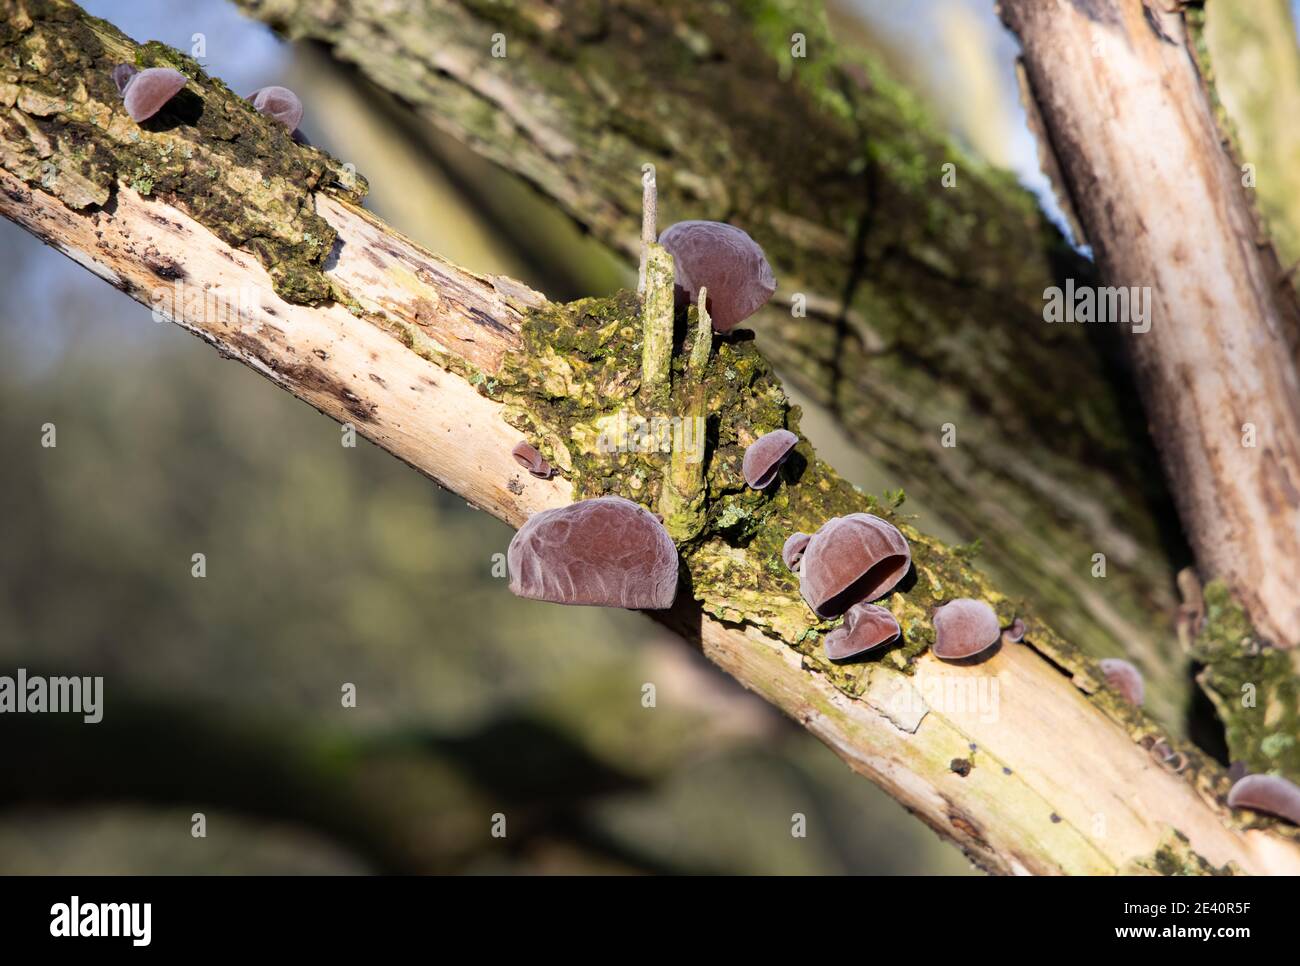 Crick, Northamptonshire - 21/01/21: Wood Ears fungi (Auricularia auricula-judae) growing on a decaying elder tree branch. Stock Photo